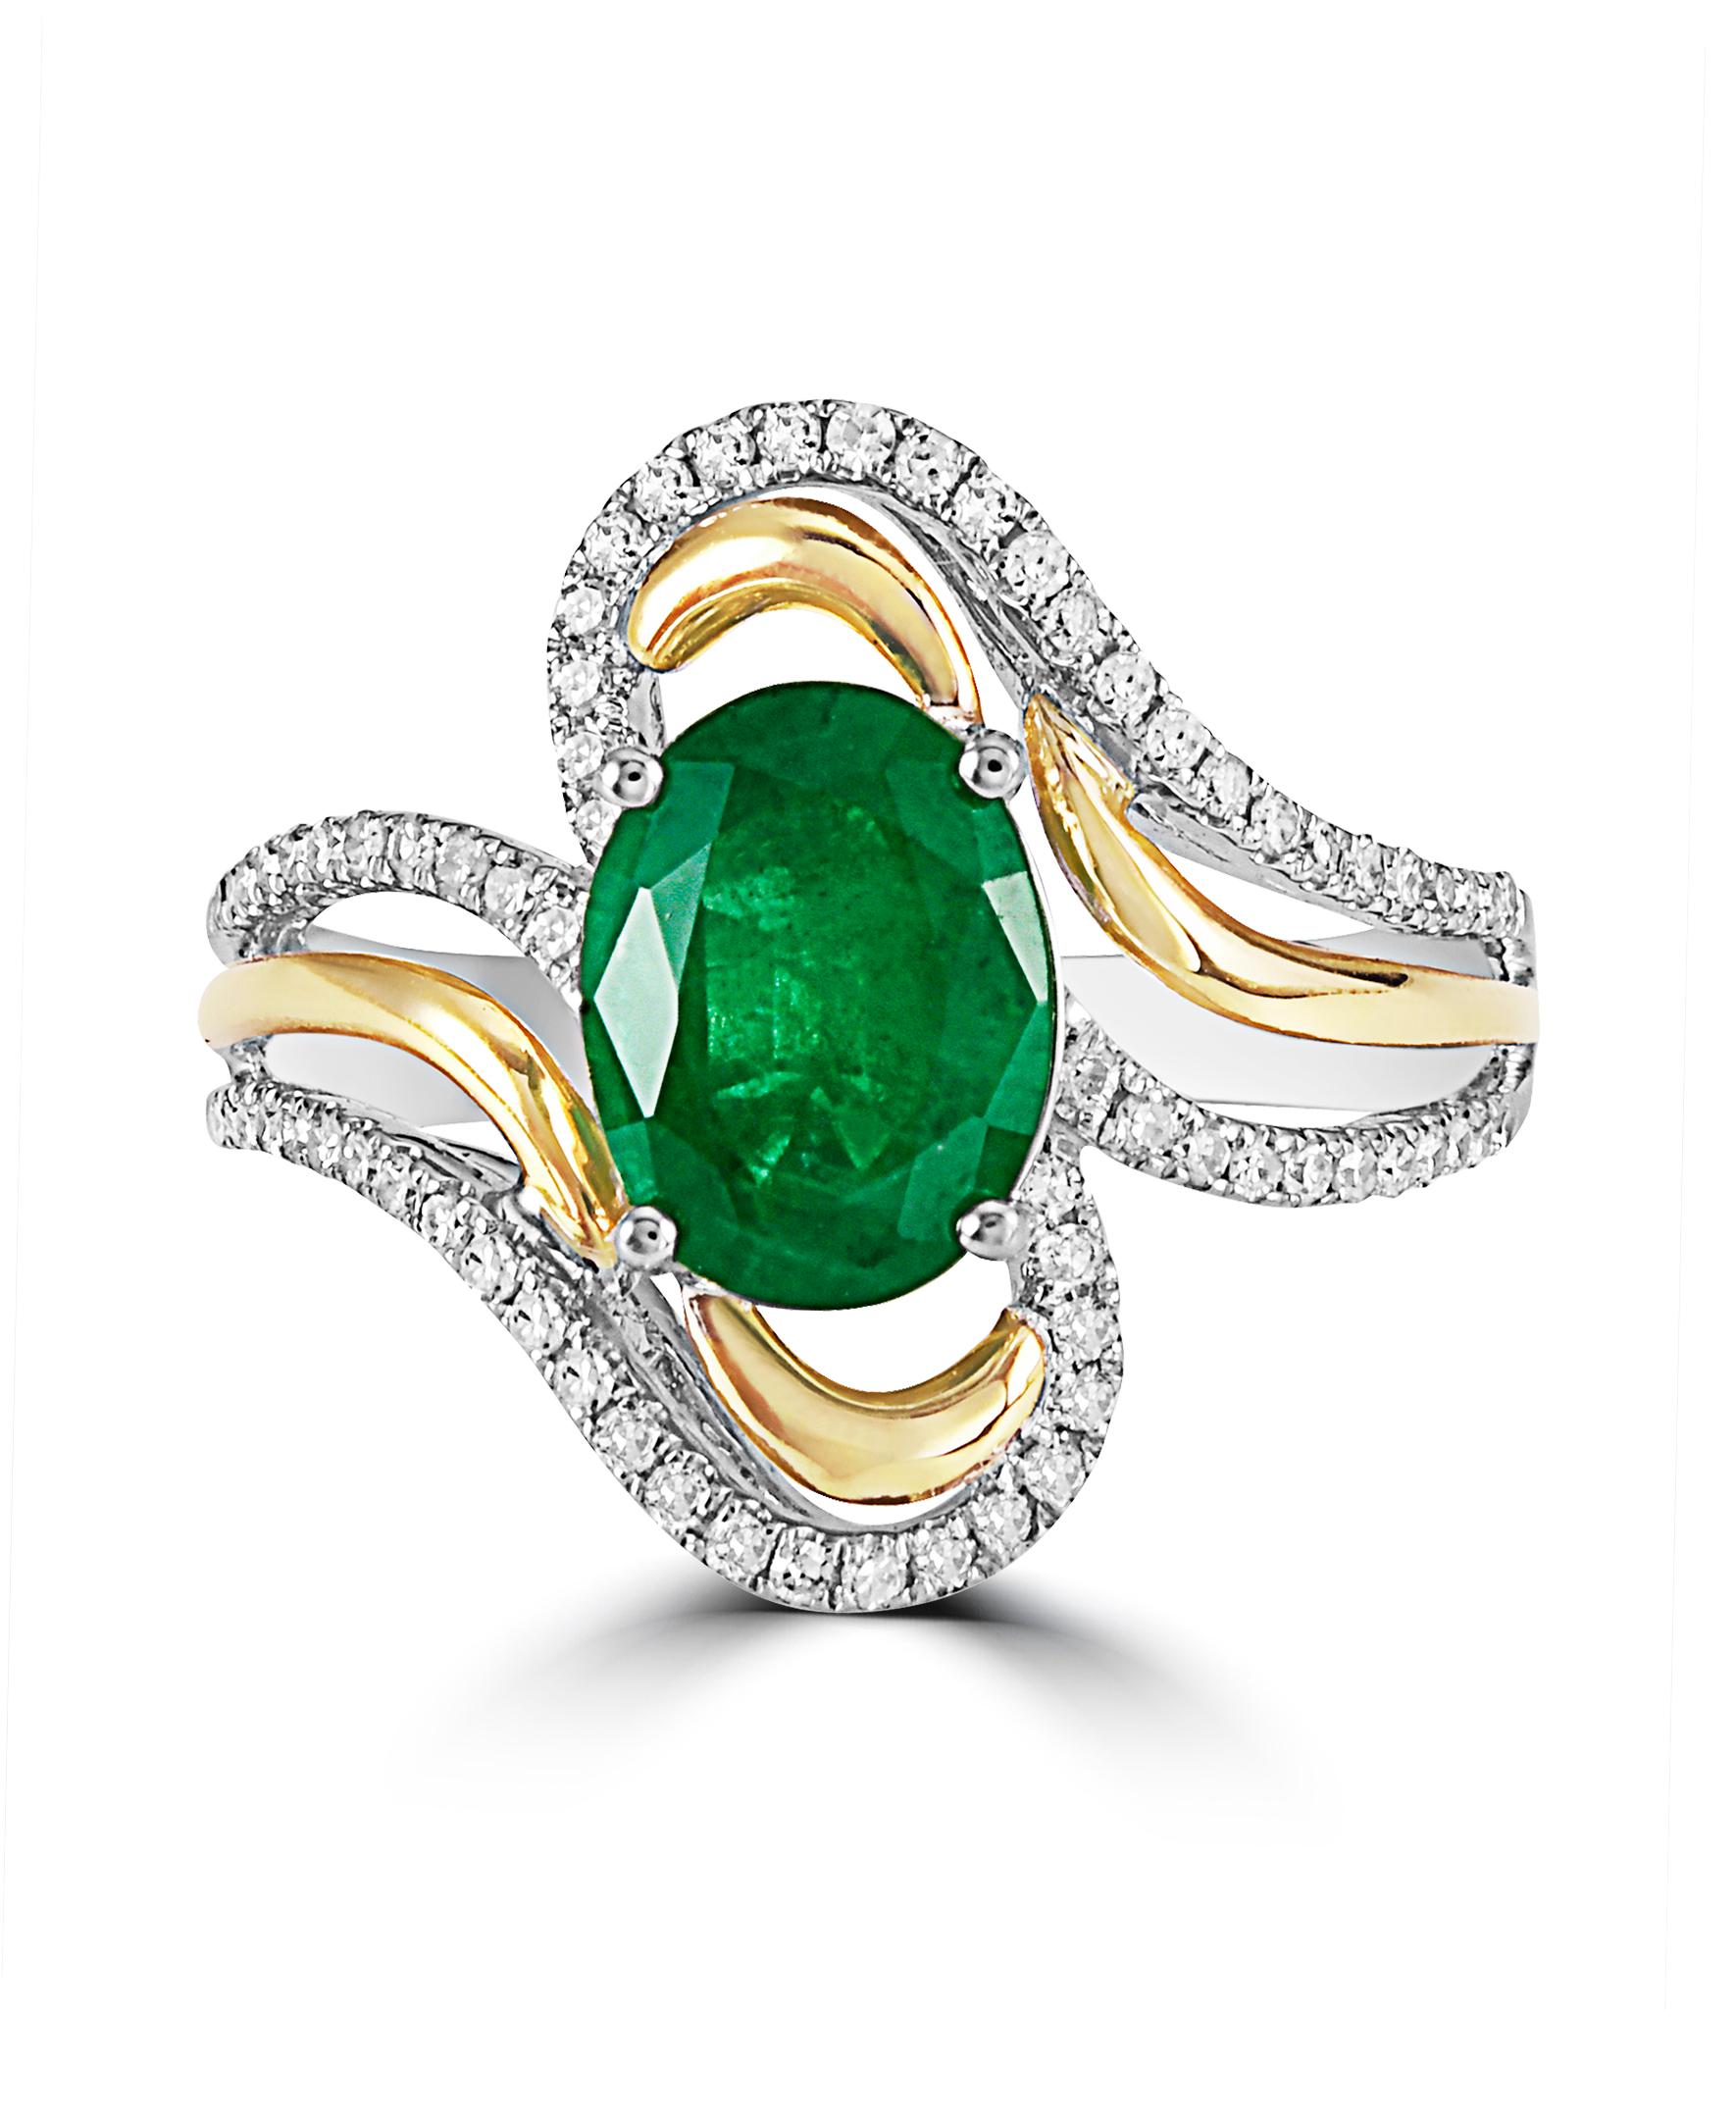 This Effy design ring is set in 14K white and yellow gold. The center stone is an oval shape Emerald and the weight is 1.52ct..
The diamonds are round in shape and the total weight is 0.33 ct.
This ring is a sizable 7. 
The item number is AT22.